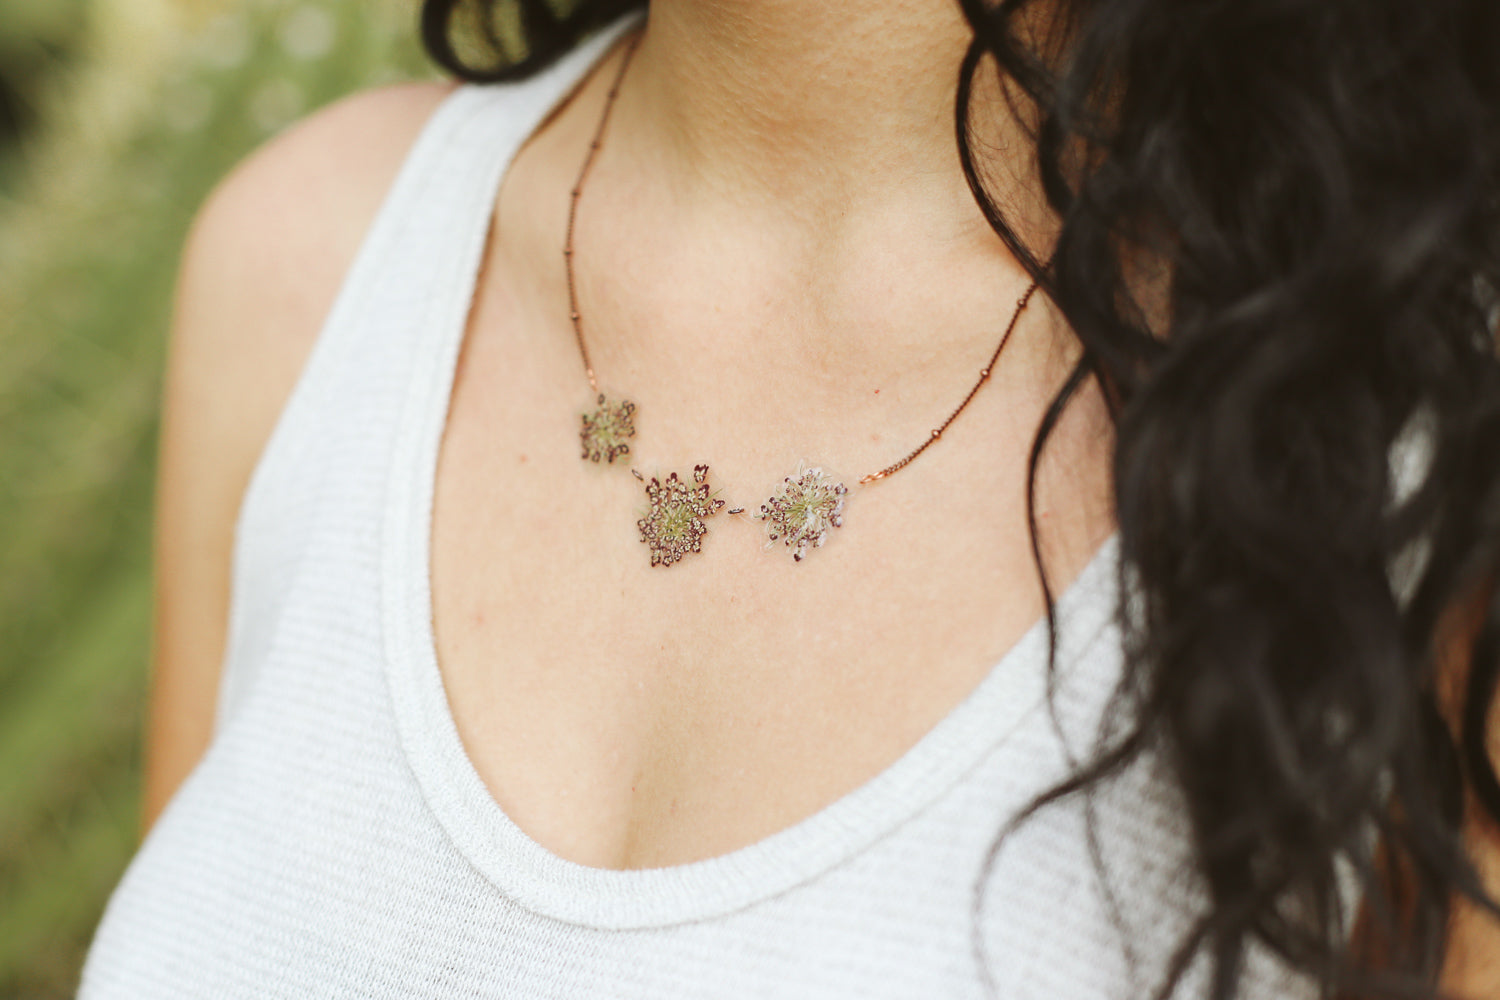 Purple Queen Anne’s Lace Pressed Flower Necklace